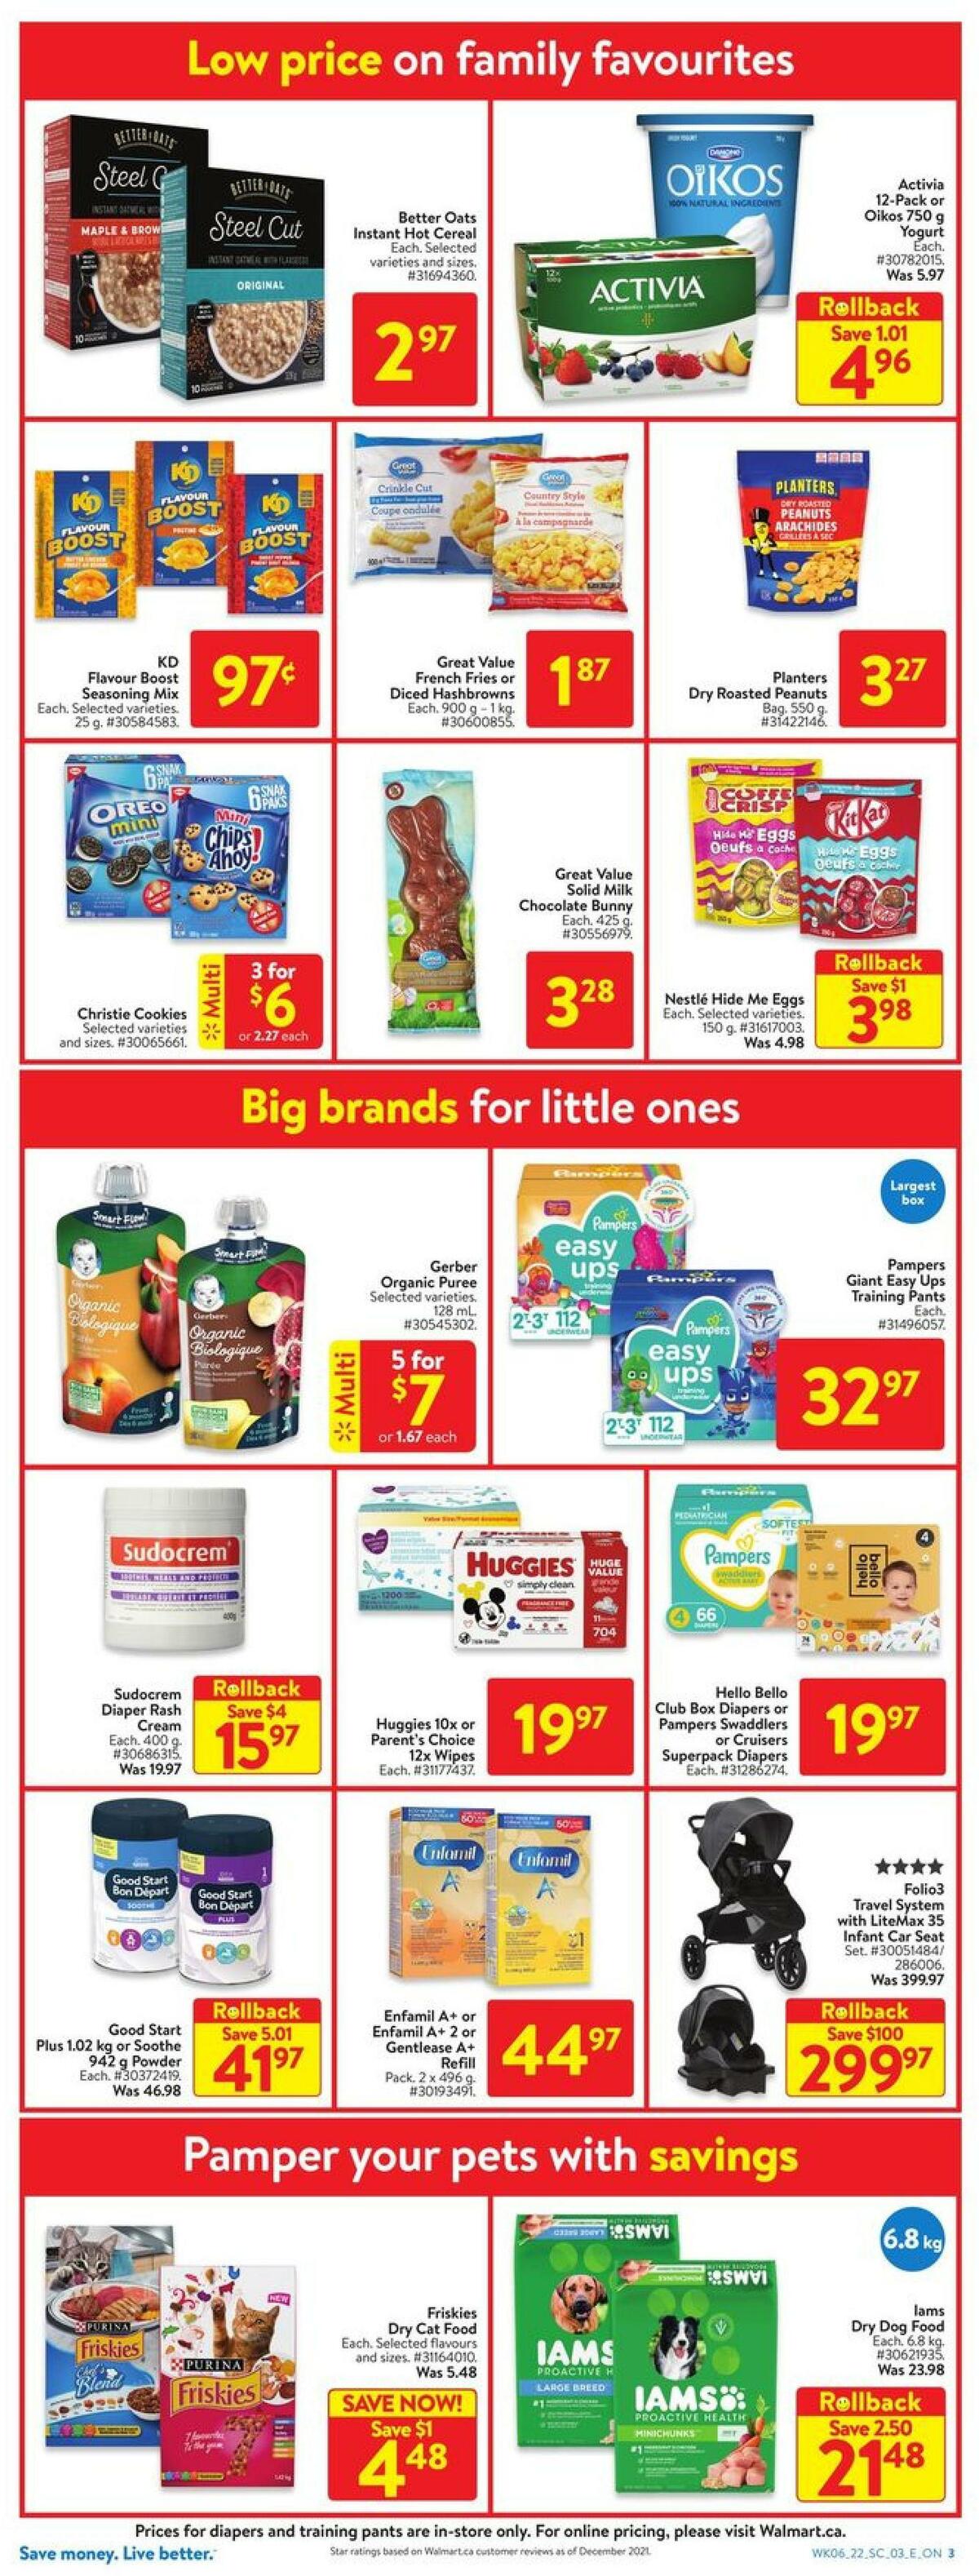 Walmart Flyer from March 3